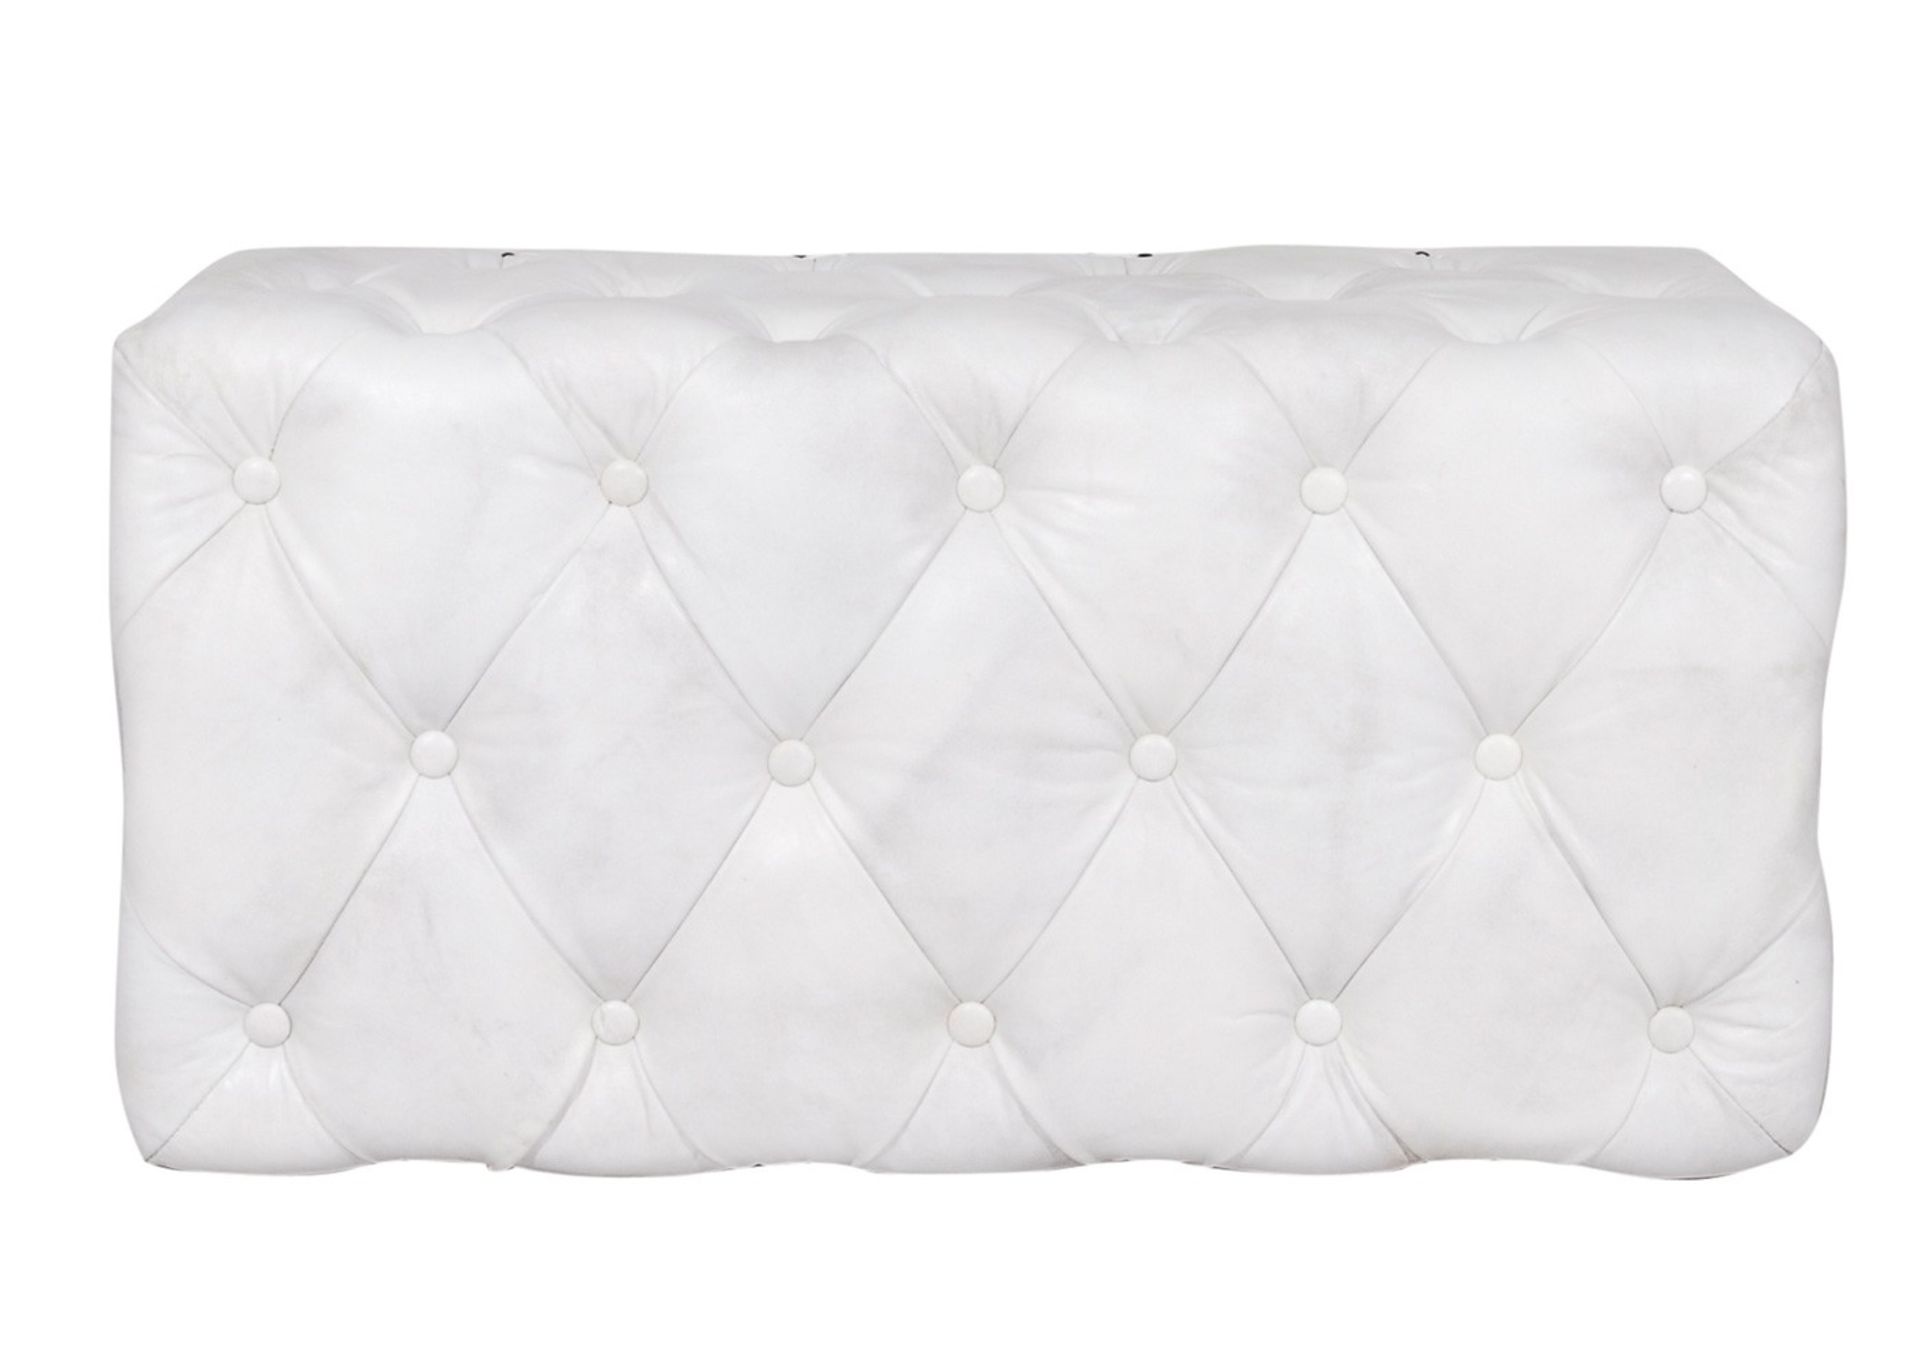 Lord Digsby Ottoman Vintage Bianco Inspired By The Old Leather Furniture That Would Have Filled